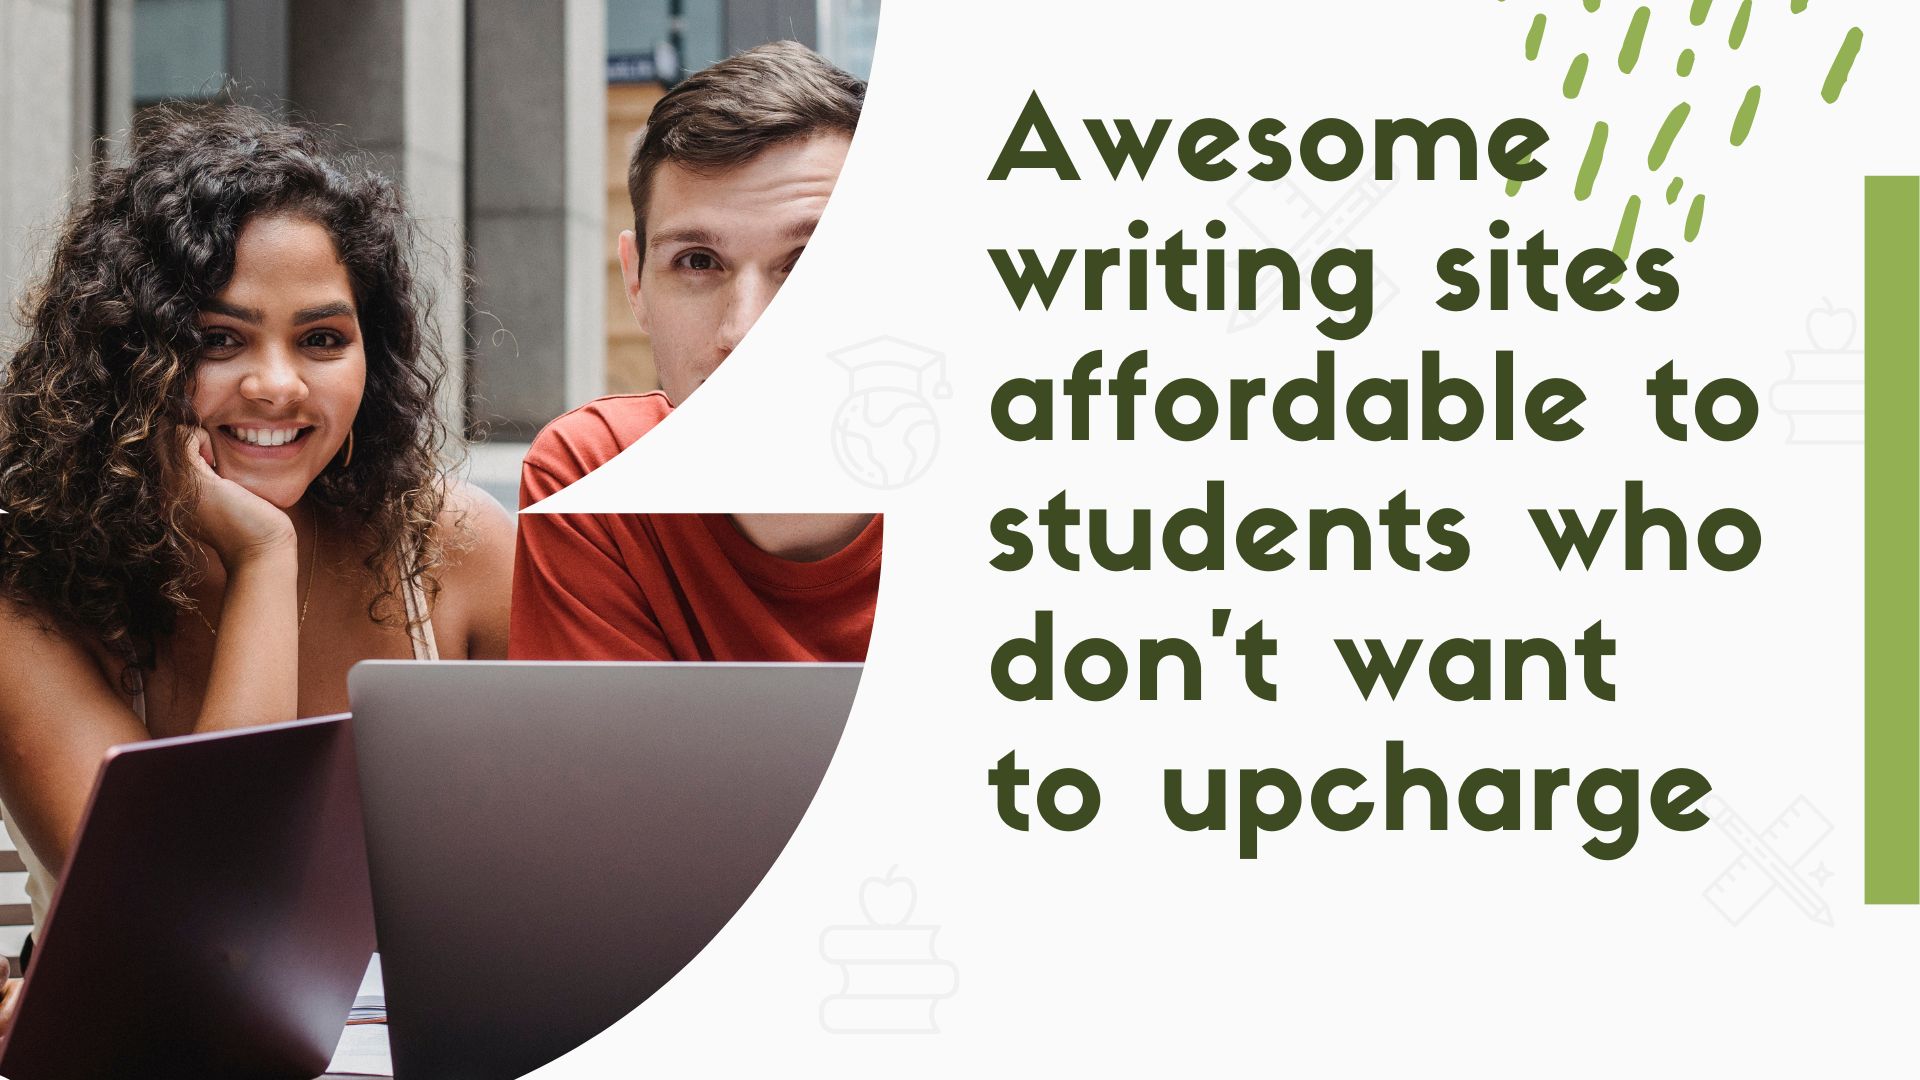 awesome writing sites affordable to students who don't want to upcharge